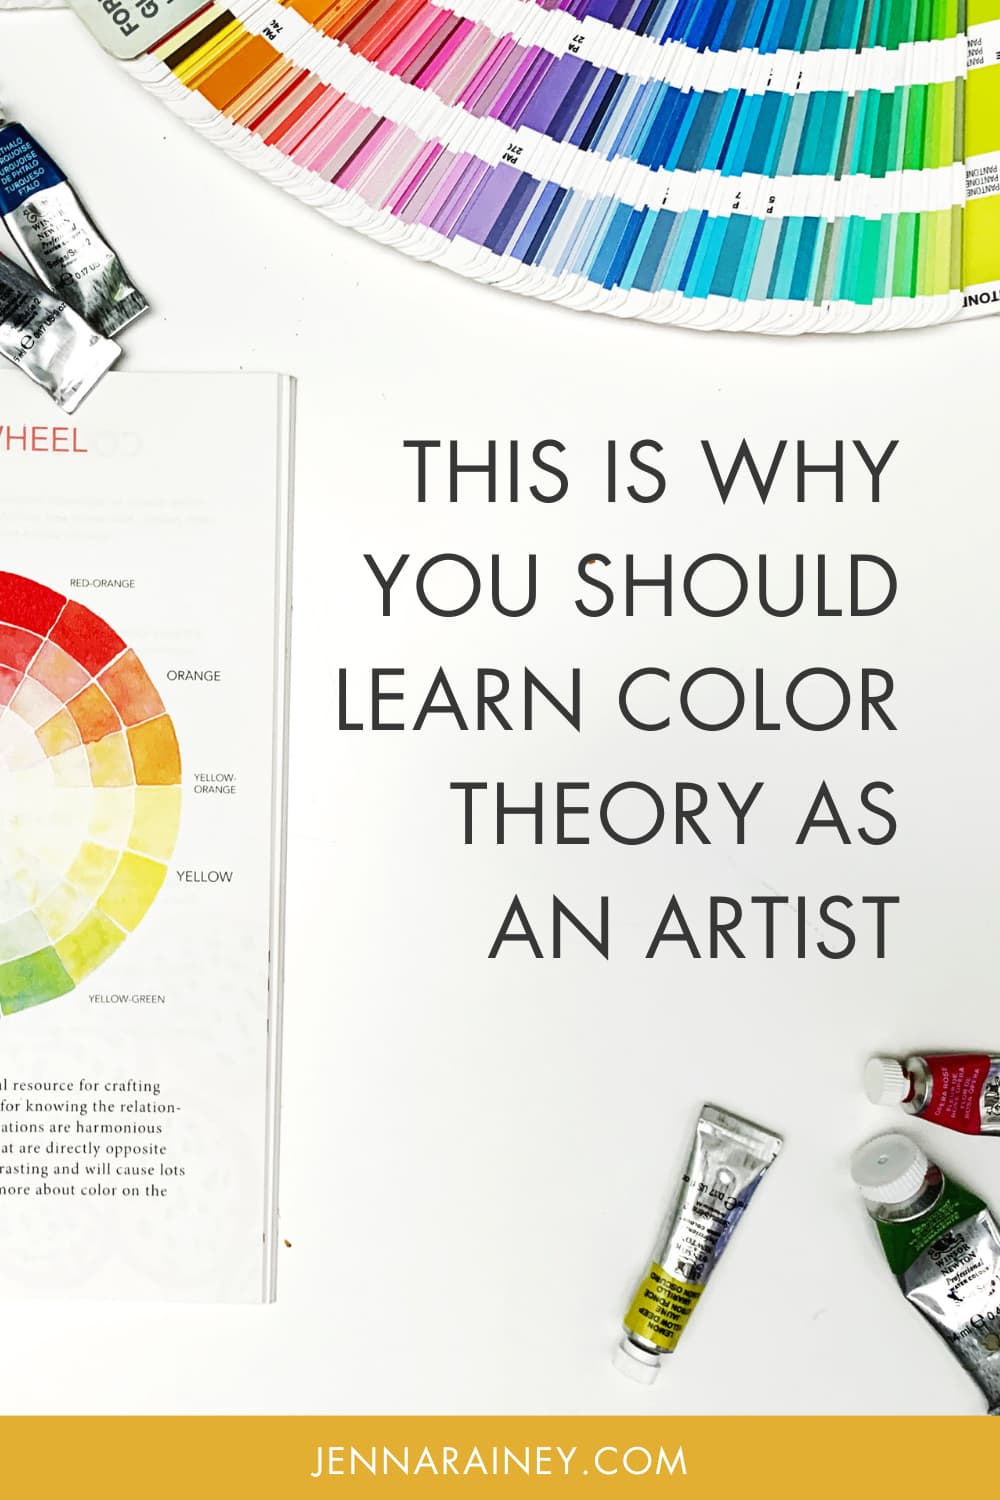 Color Theory And Why It Matters in Art